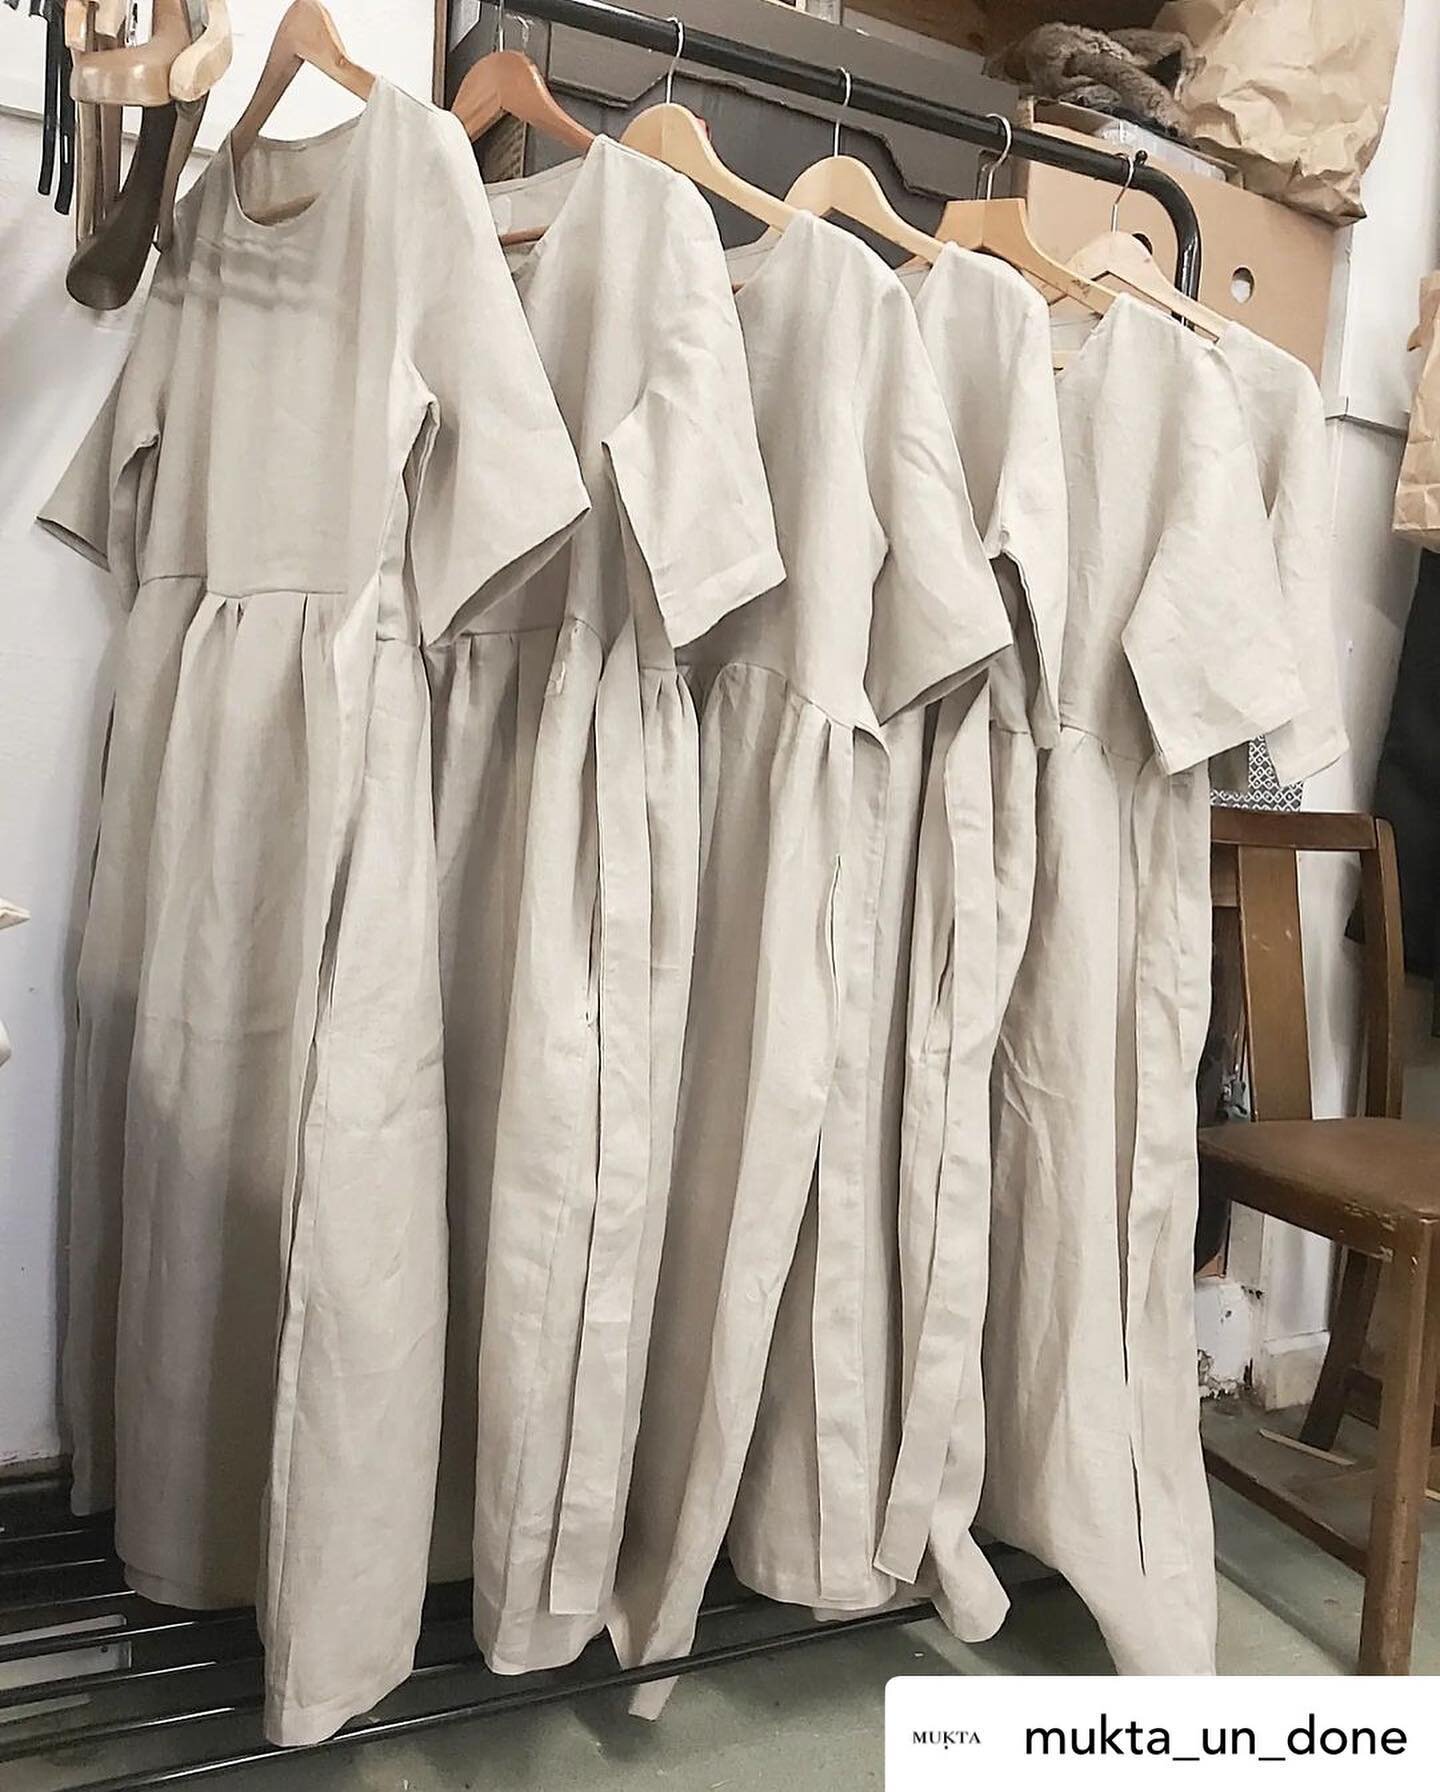 Beautiful linen dresses sewn by the wonderful Abi from @mukta_un_done who heads up our small scale production for @thecraftmongers in ashburton. Such a beautiful soft linen and a perfect addition to their wonderful shop